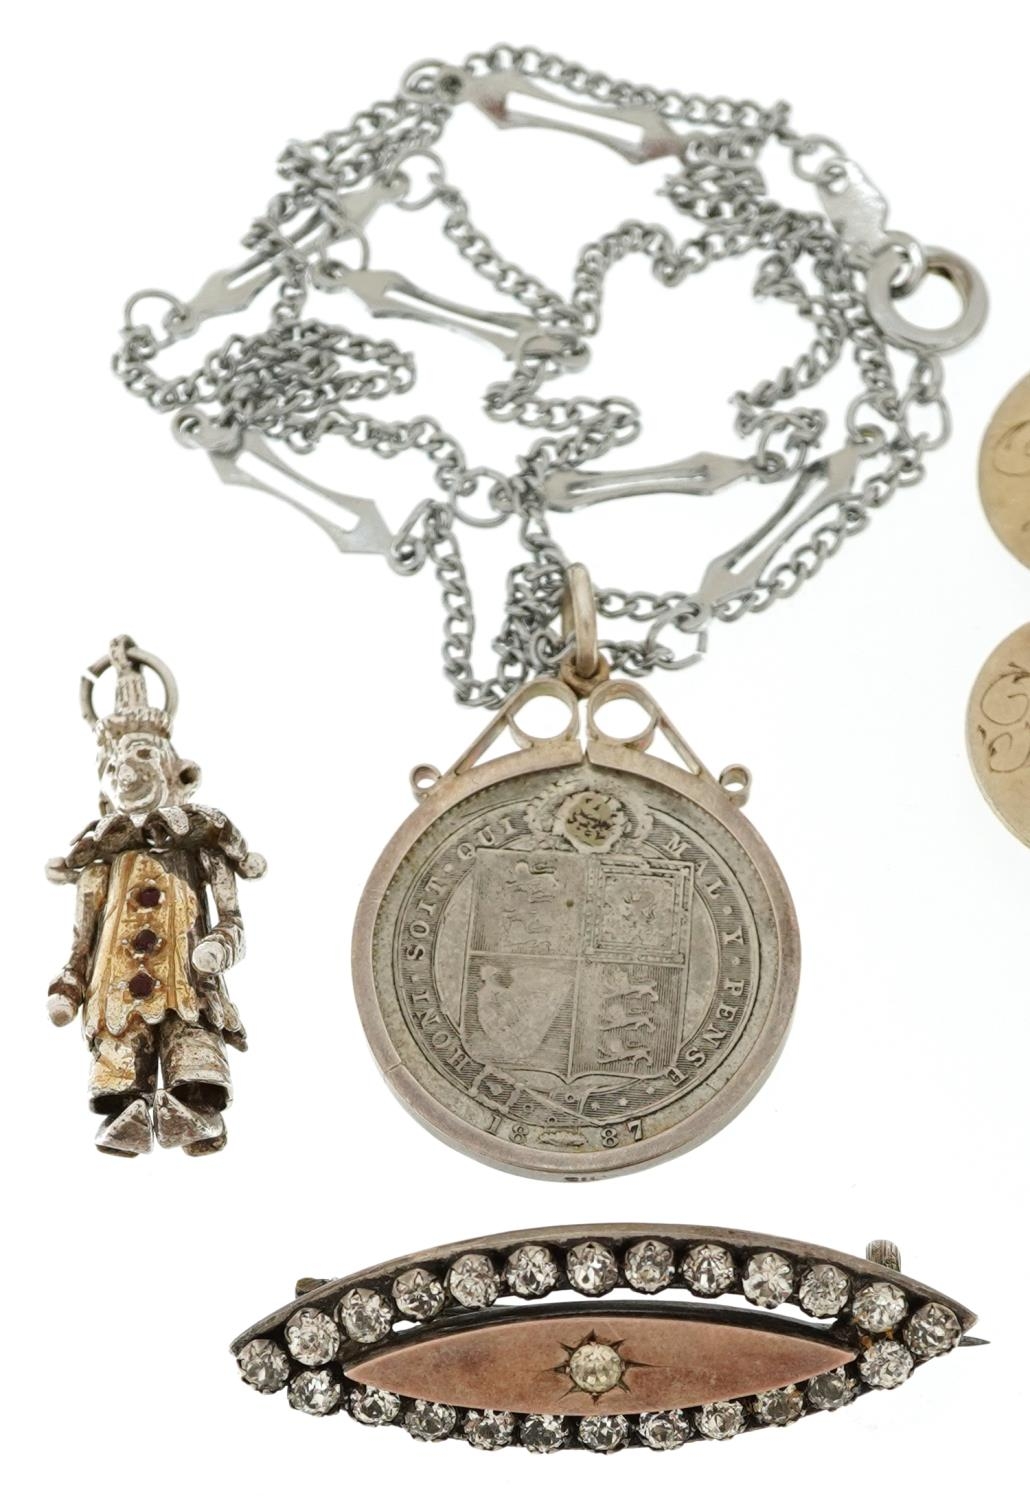 Antique and later silver jewellery including a Victorian coin necklace, articulated clown pendant - Image 2 of 5